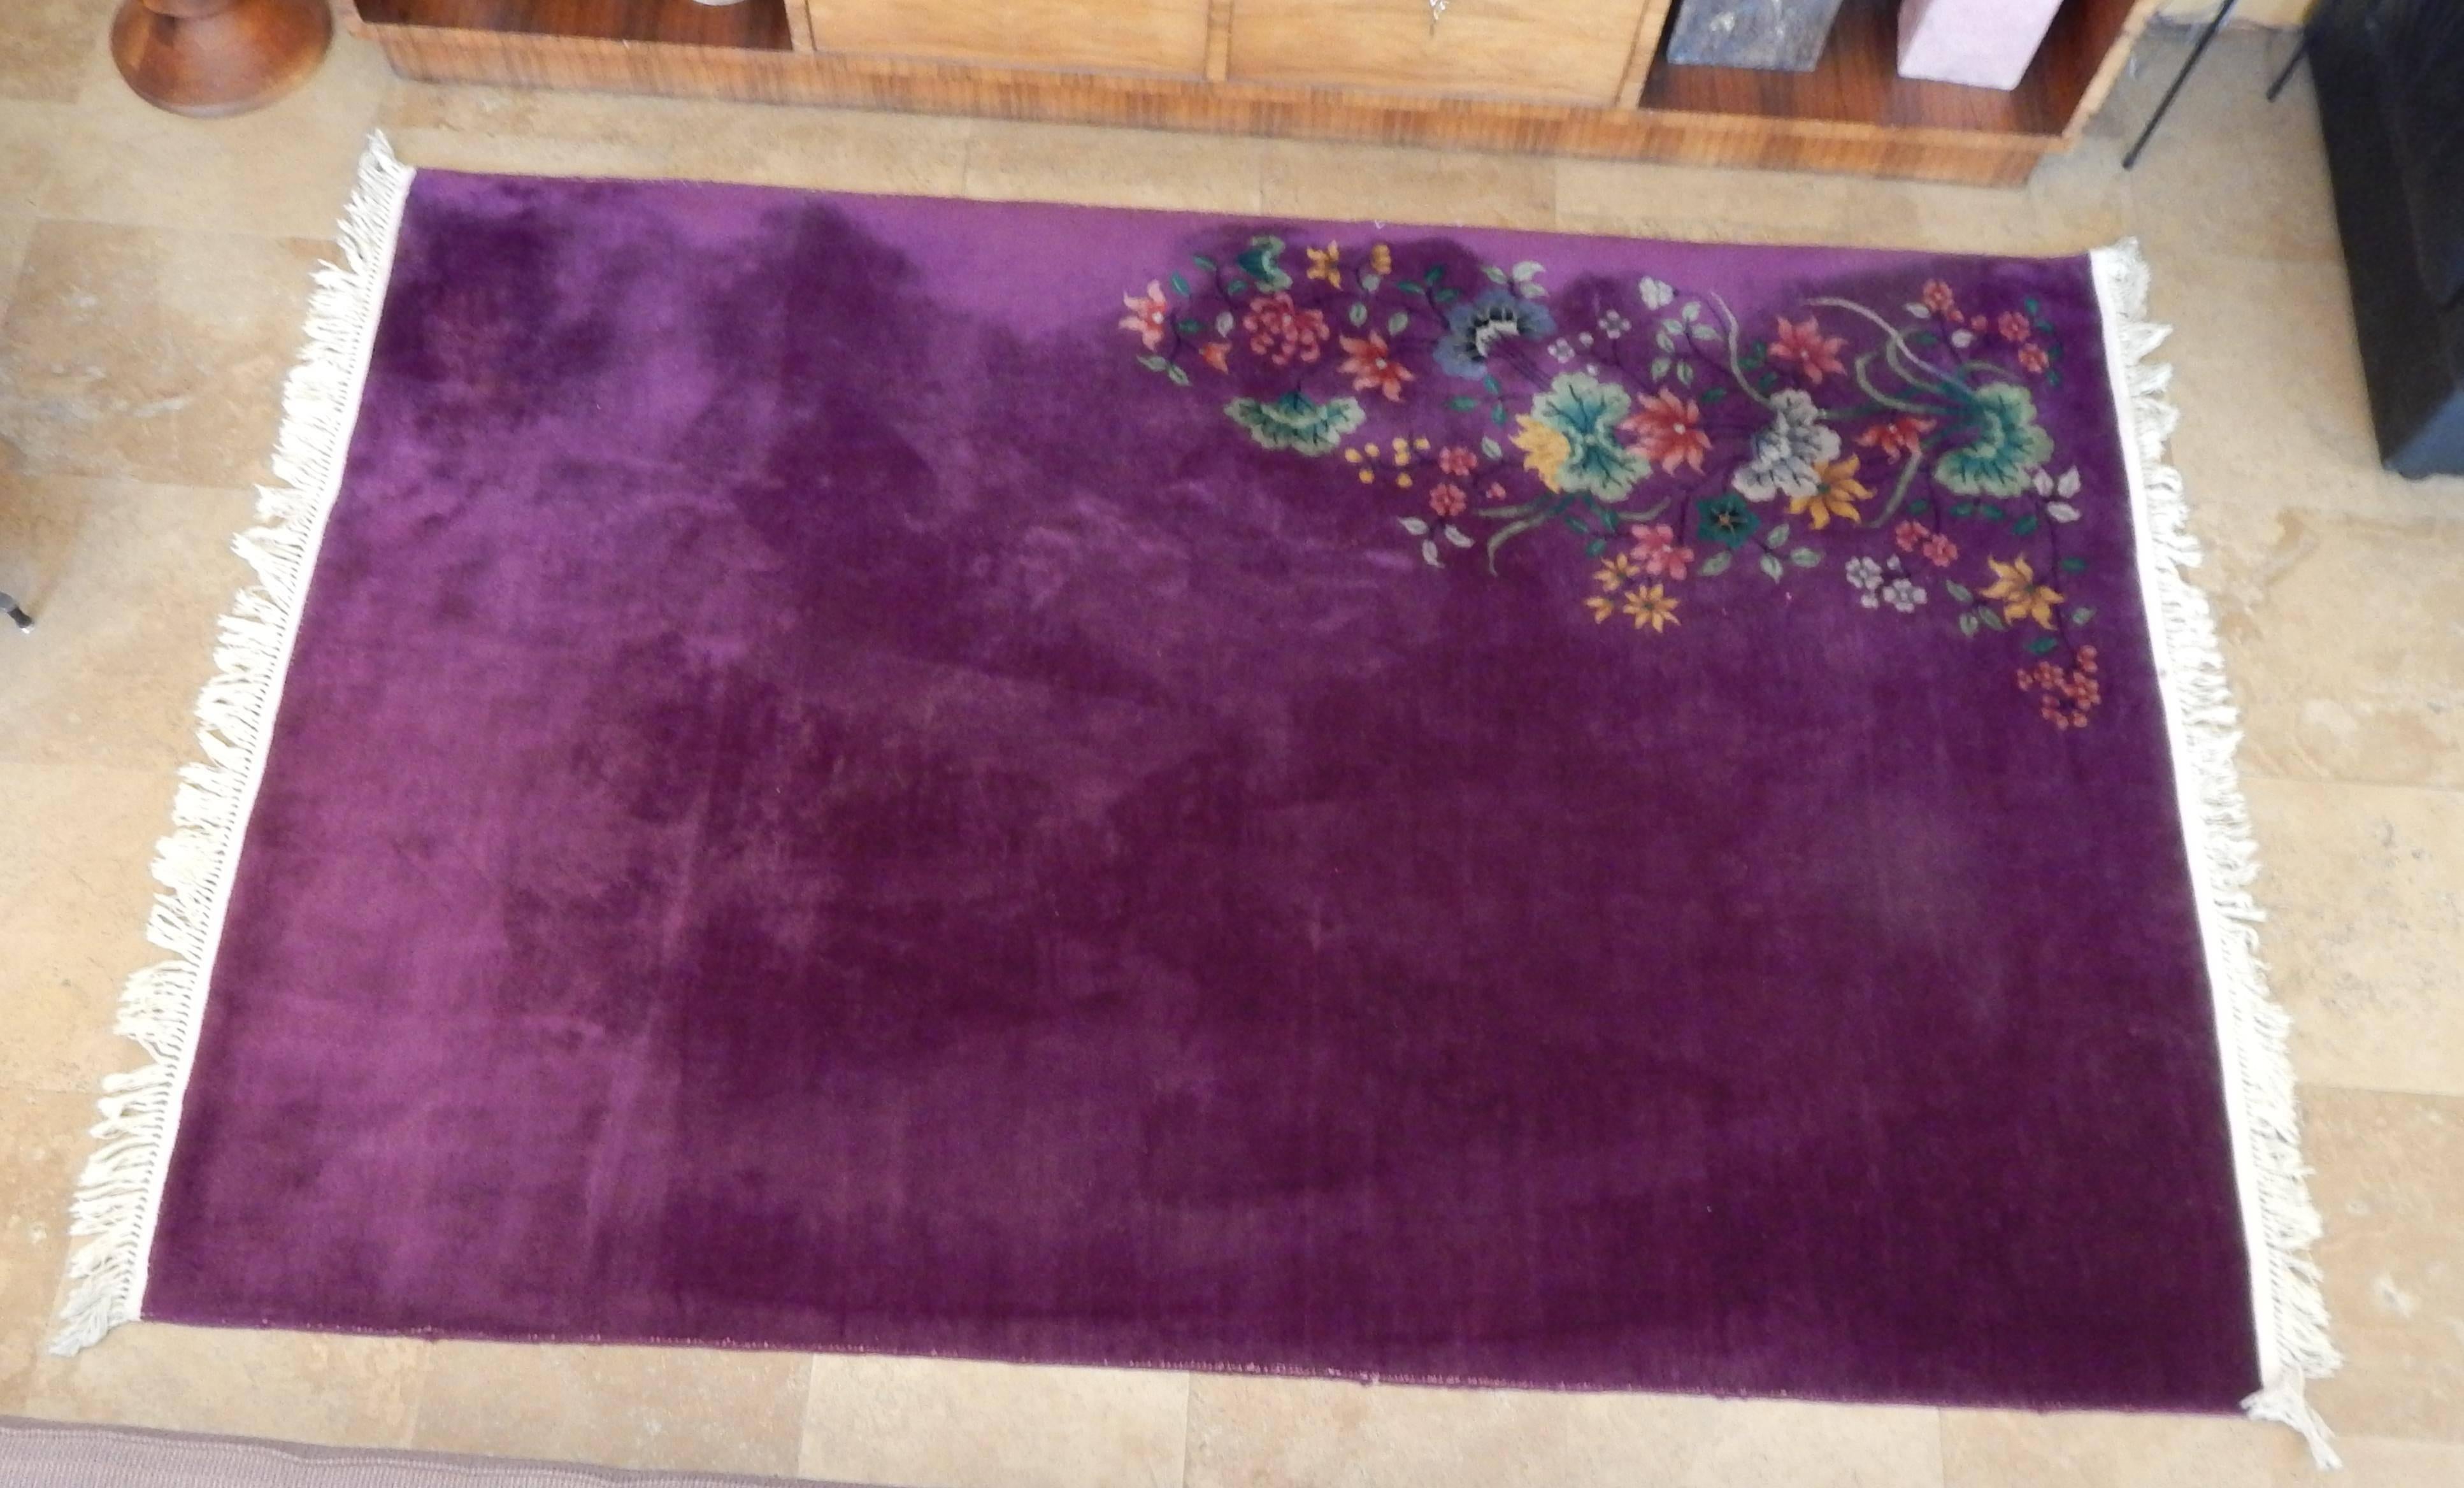 A fabulous early 20th century Chinese Art Deco wool rug in deep purple.
One corner bears an overlay of multicolored flowers in pink, green and blue. The colors are rich and bright and the rug is in very good condition.
No staining and negligible